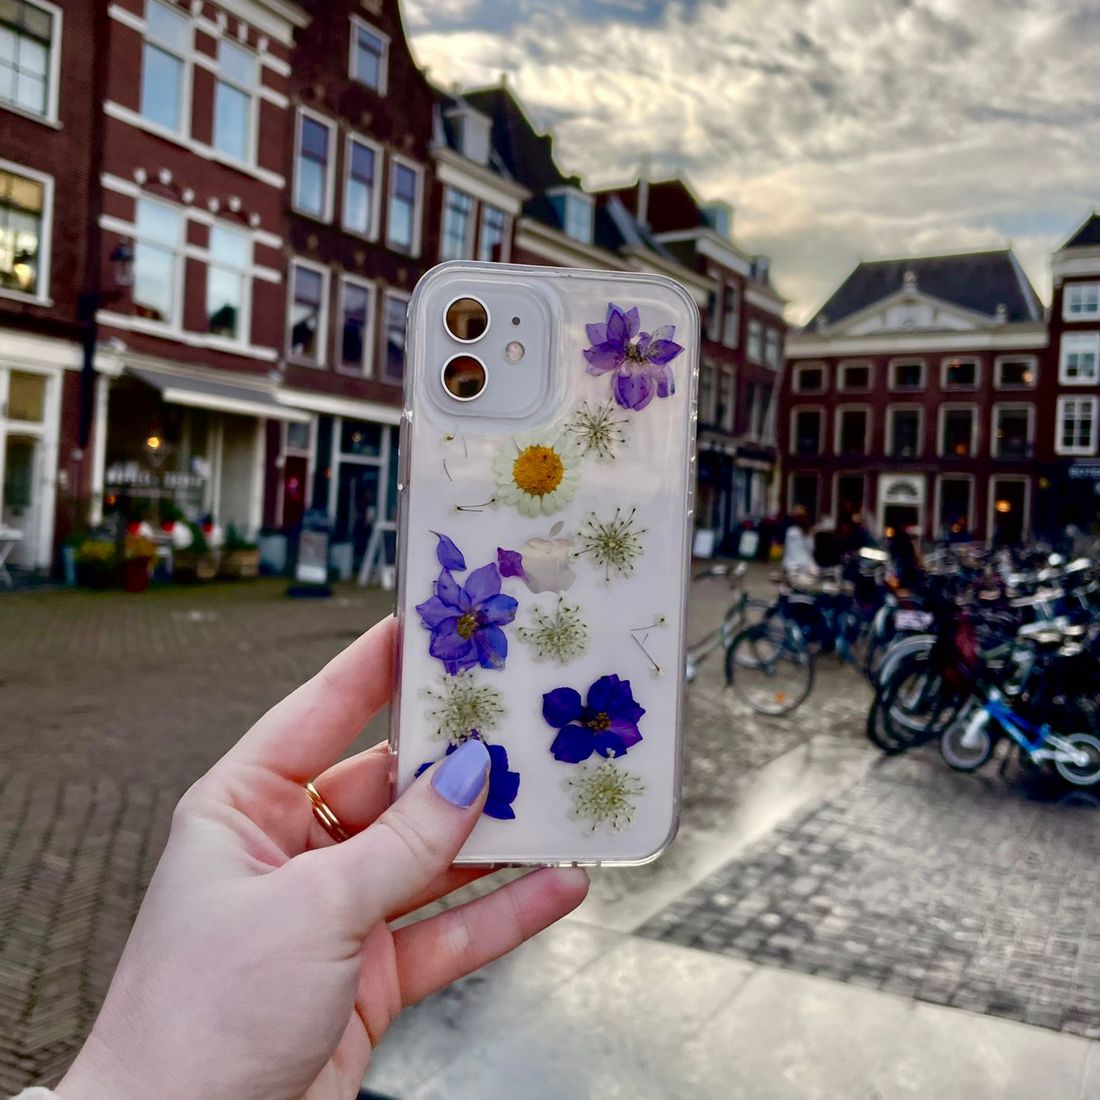 Maeve Dried Flowers Phone Case